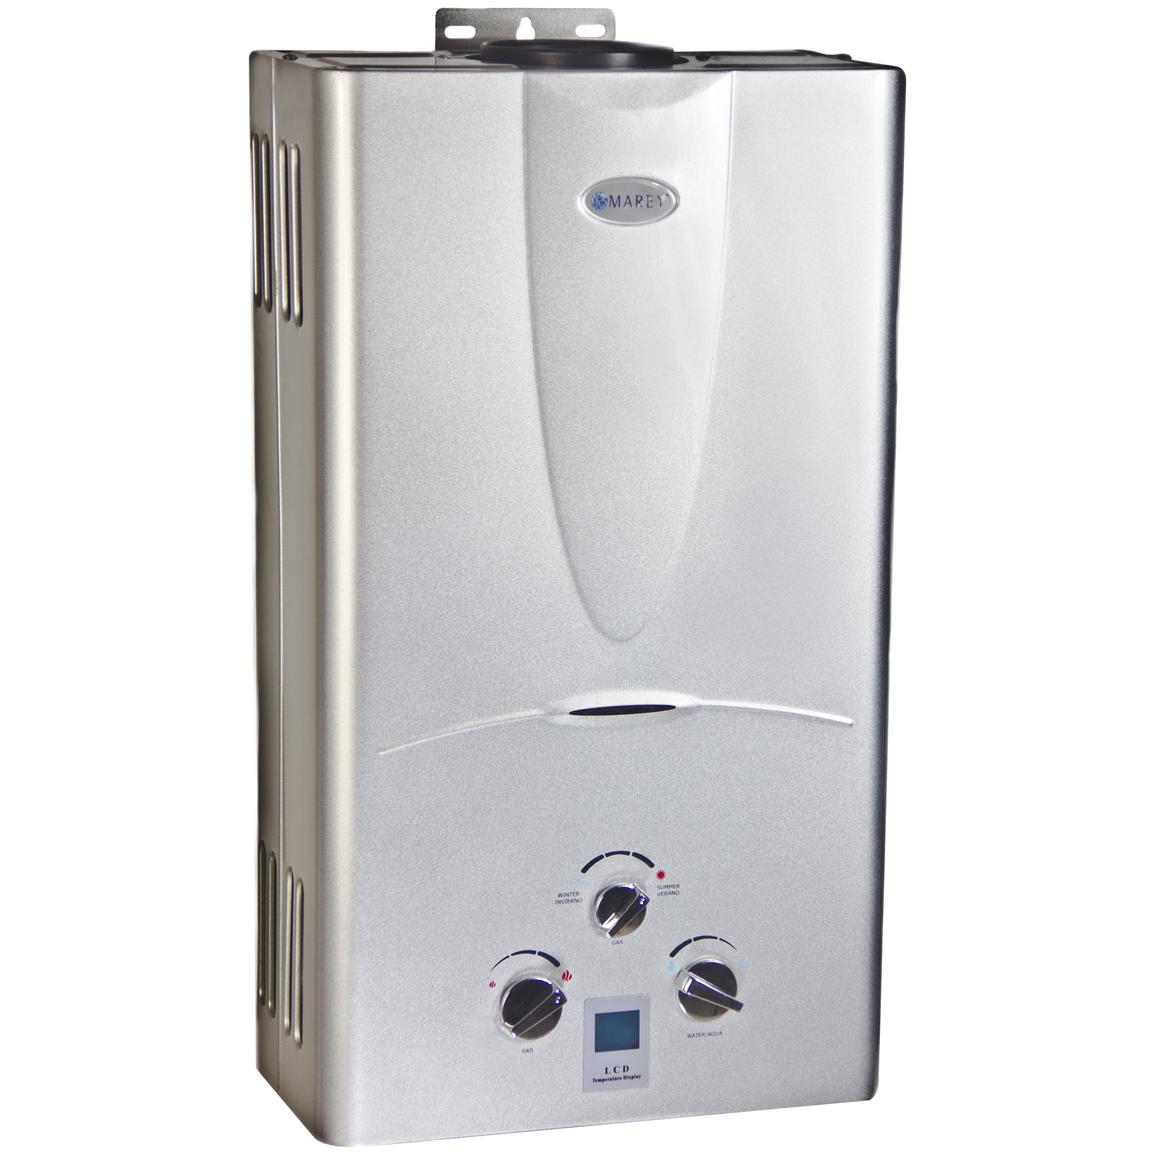 Discount Tankless Water Heater